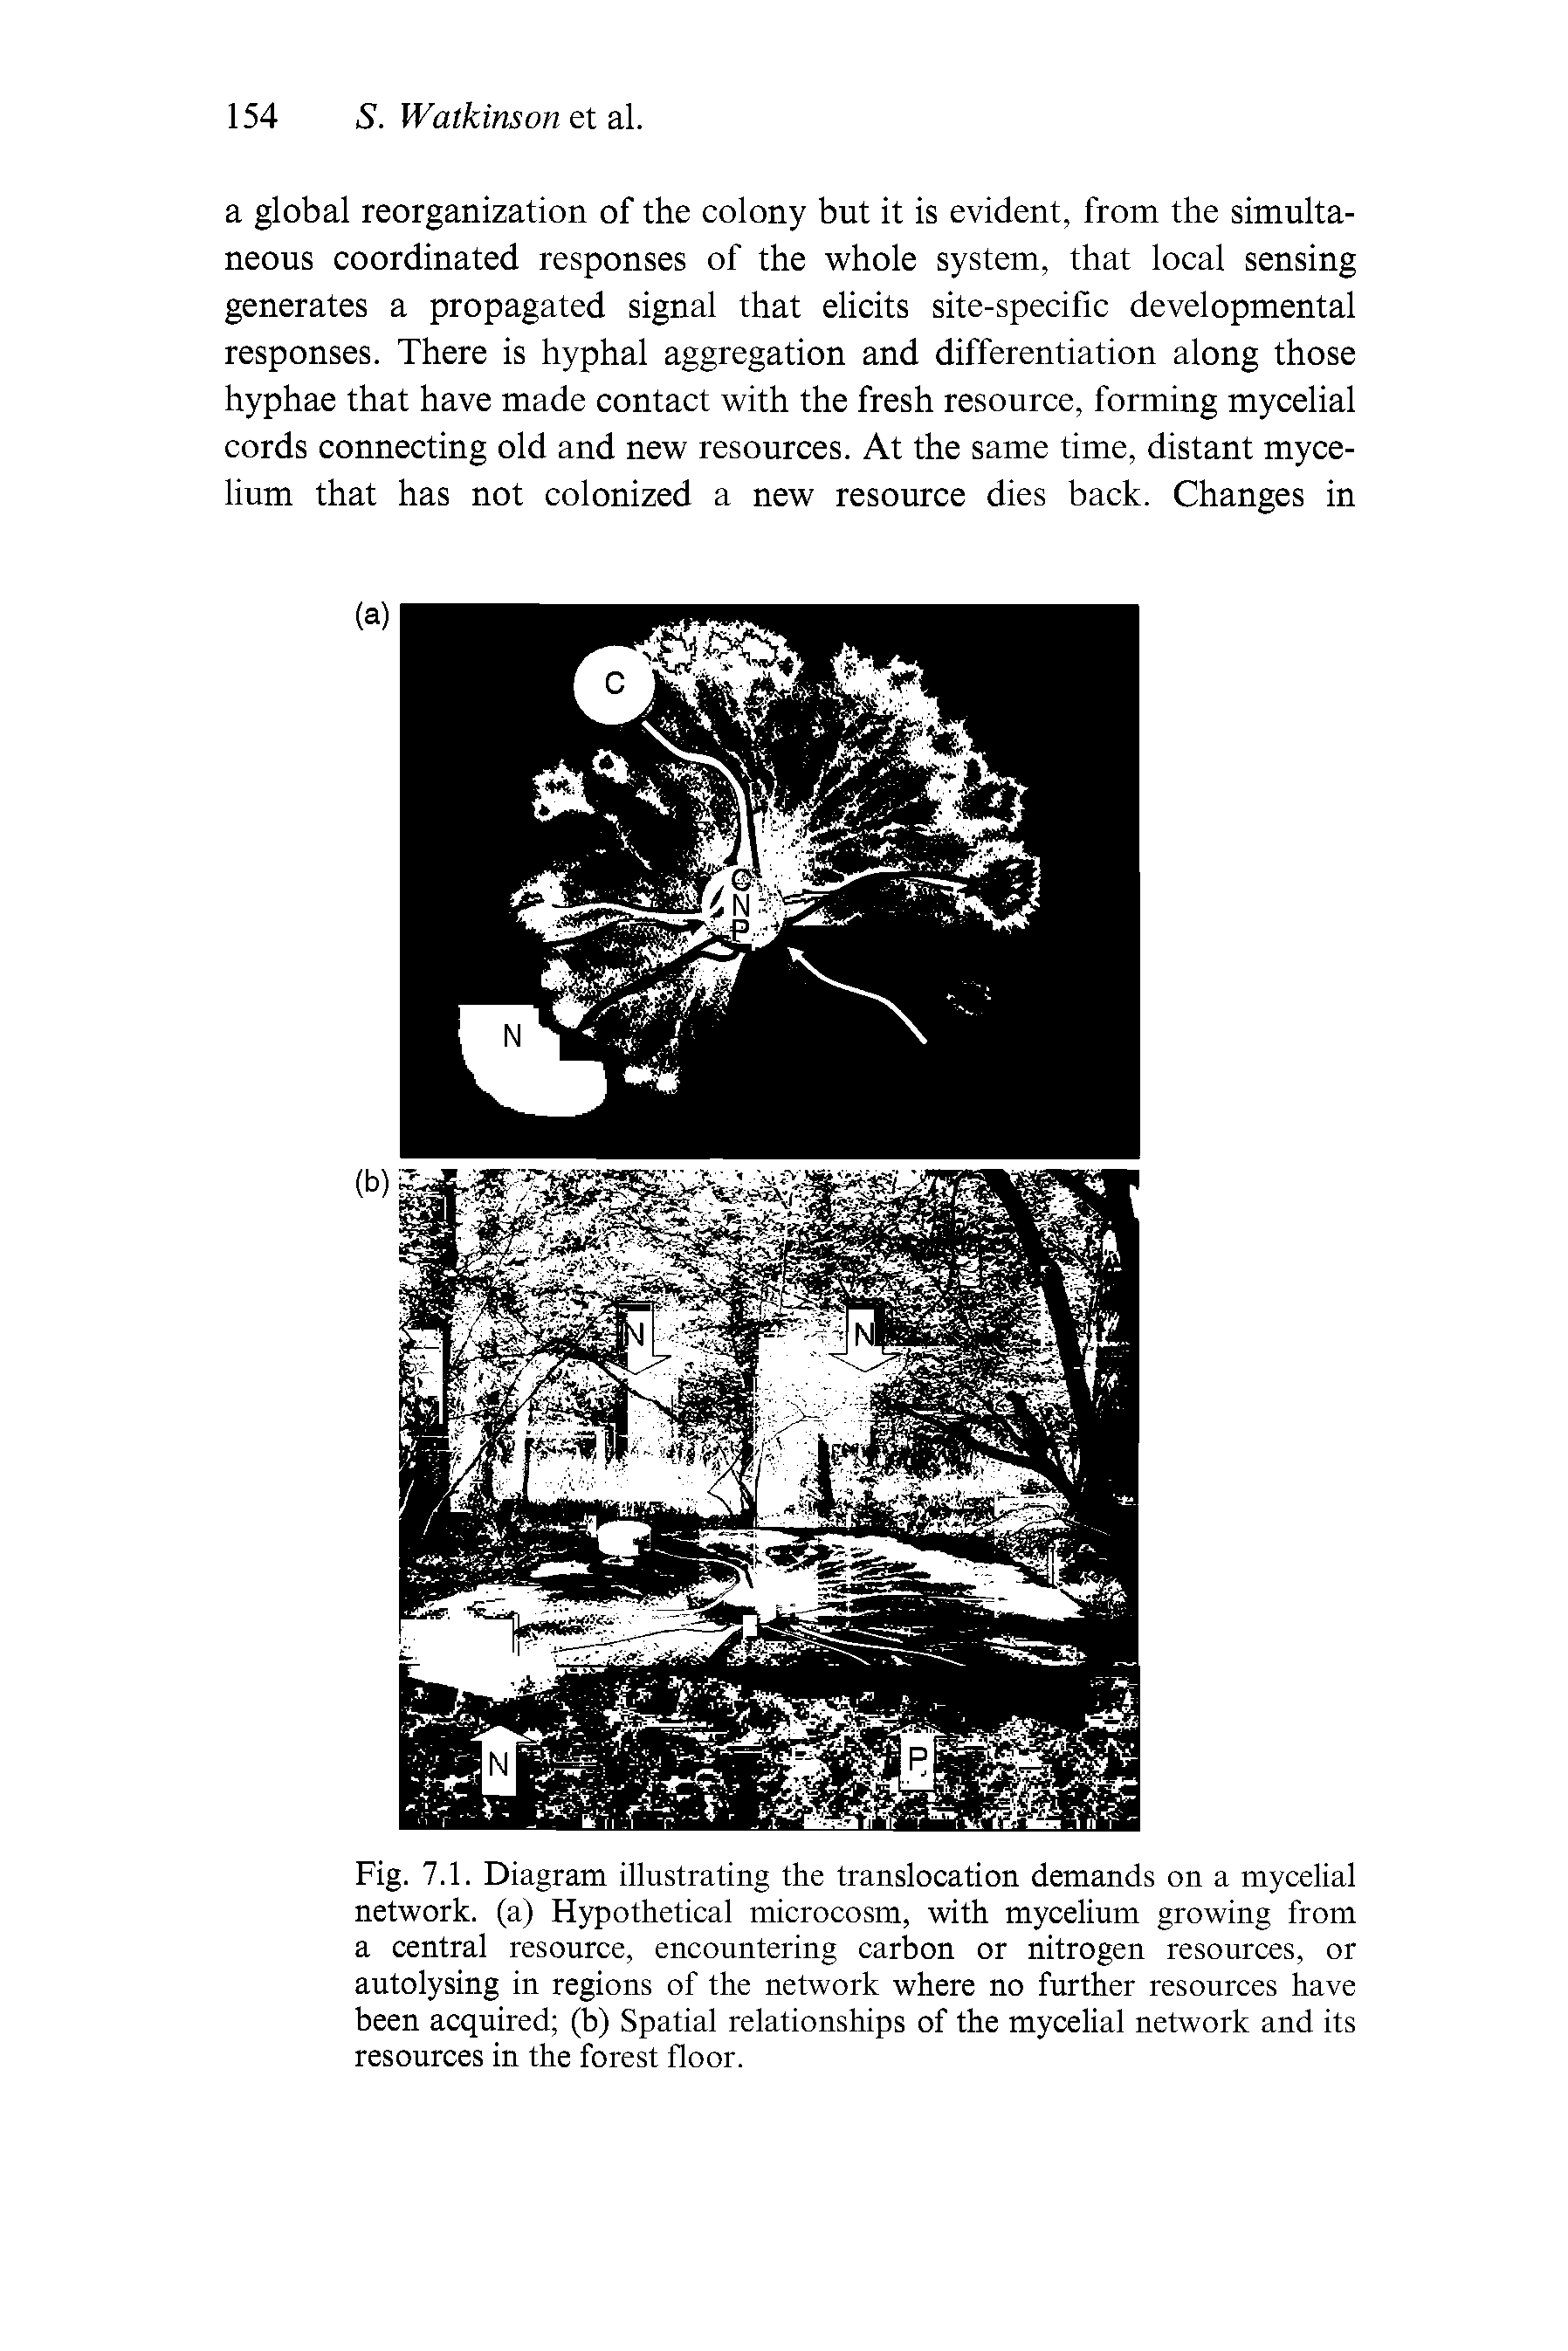 Fig. 7.1. Diagram illustrating the translocation demands on a mycelial network, (a) Hypothetical microcosm, with mycelium growing from a central resource, encountering carbon or nitrogen resources, or autolysing in regions of the network where no further resources have been acquired (b) Spatial relationships of the mycelial network and its resources in the forest floor.